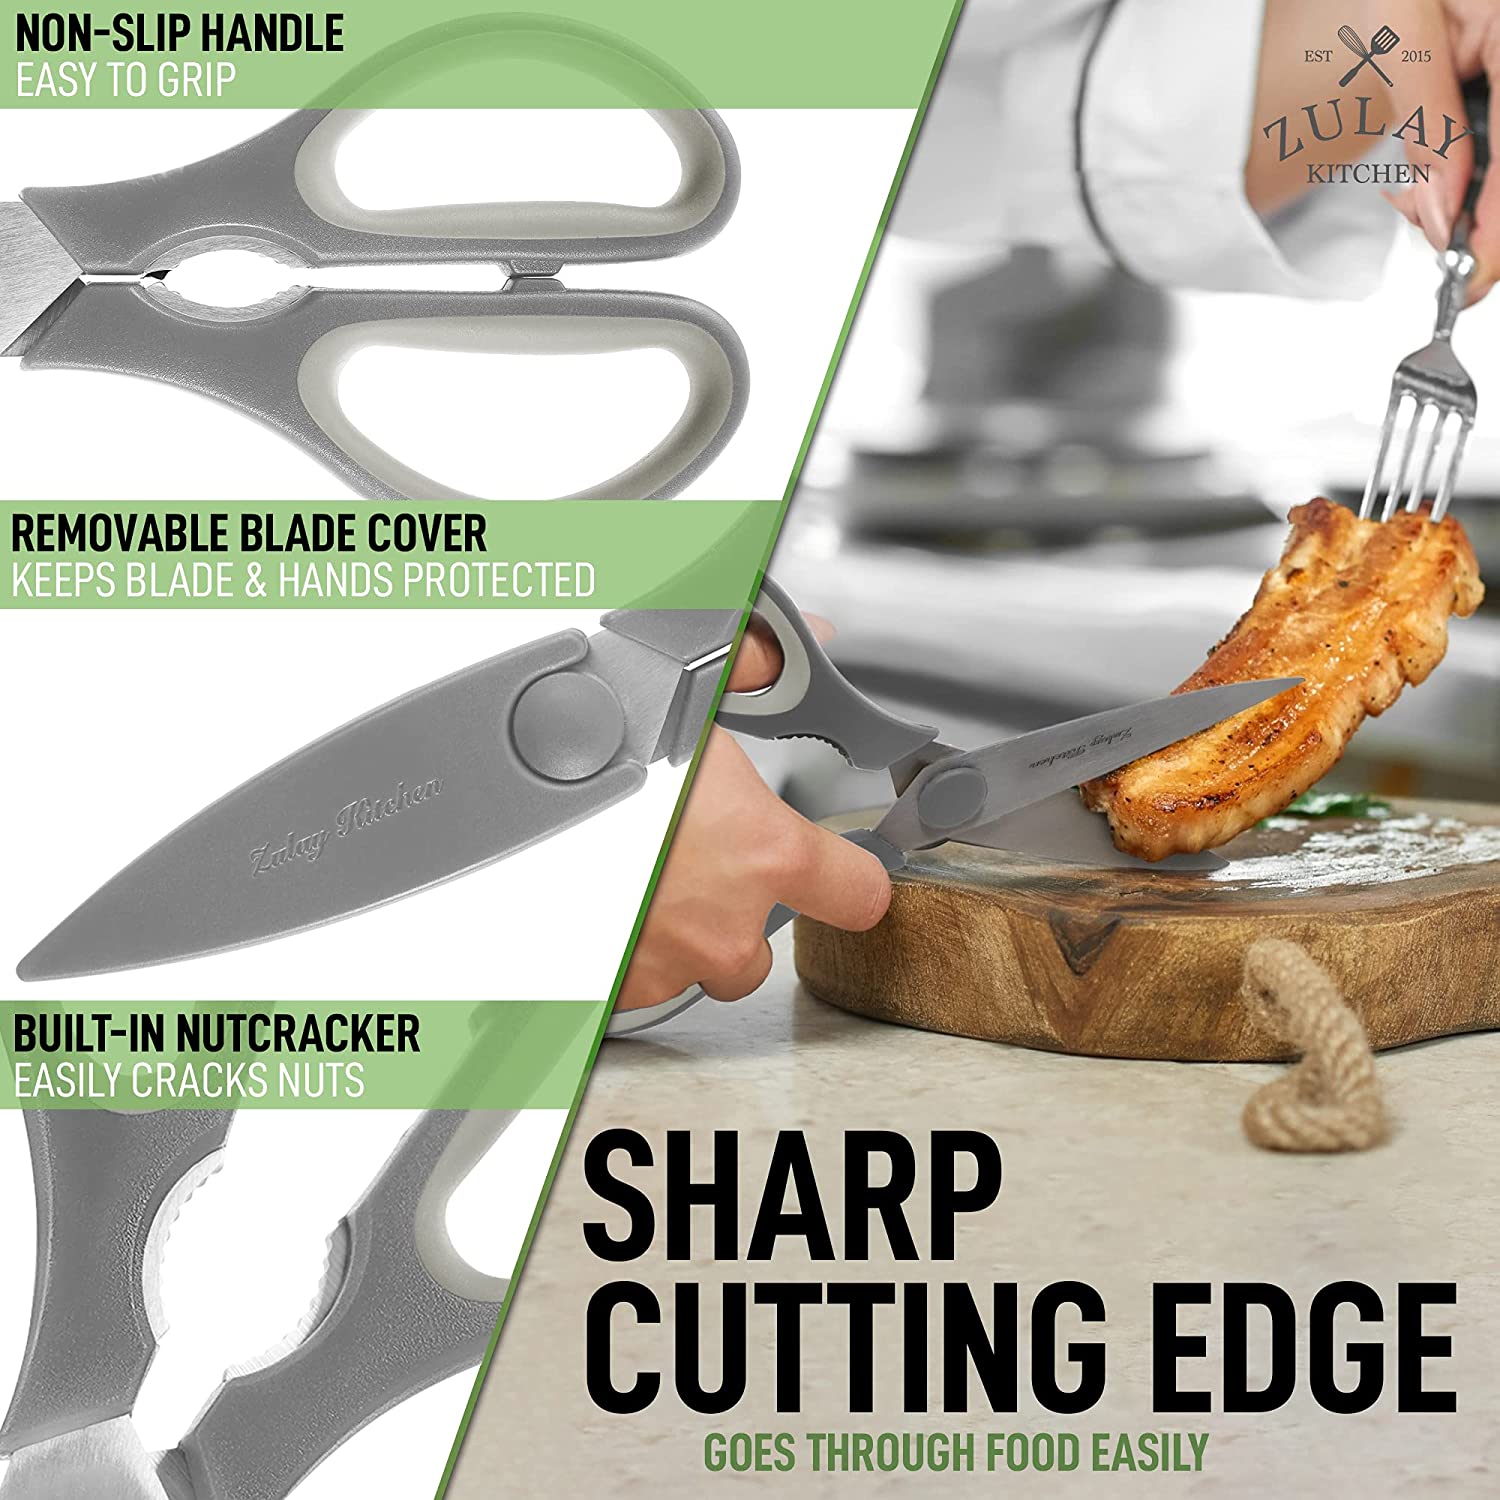 https://www.zulaykitchen.com/cdn/shop/products/stainless-steel-kitchen-shears-with-protective-coverstainless-steel-kitchen-shears-with-protective-coverzulay-kitchenzulay-kitchenz-shrs-drk-gry-cvr-632802.jpg?v=1699912415